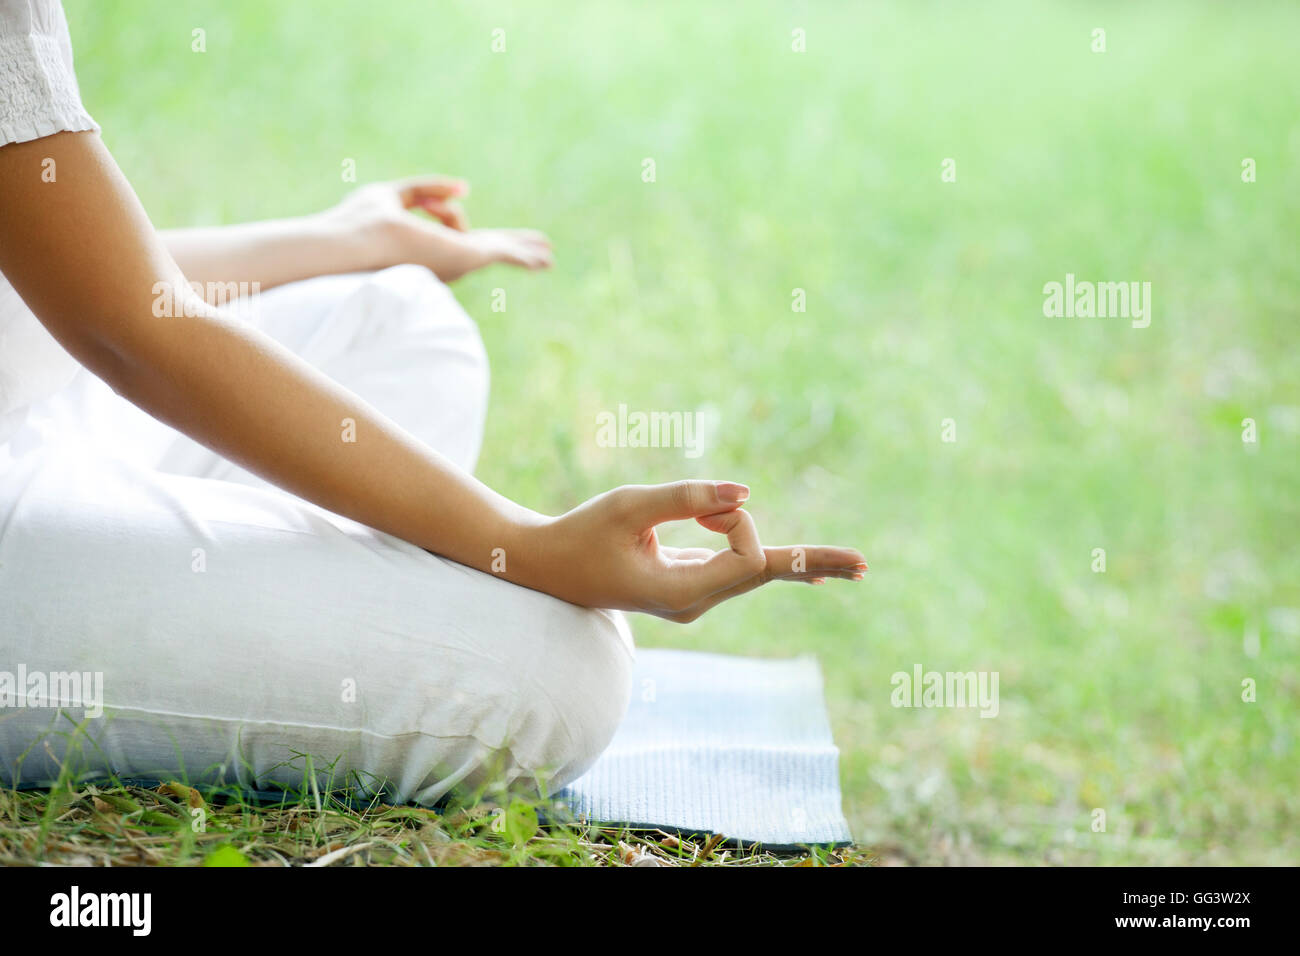 Woman's hand in a meditative gesture Stock Photo